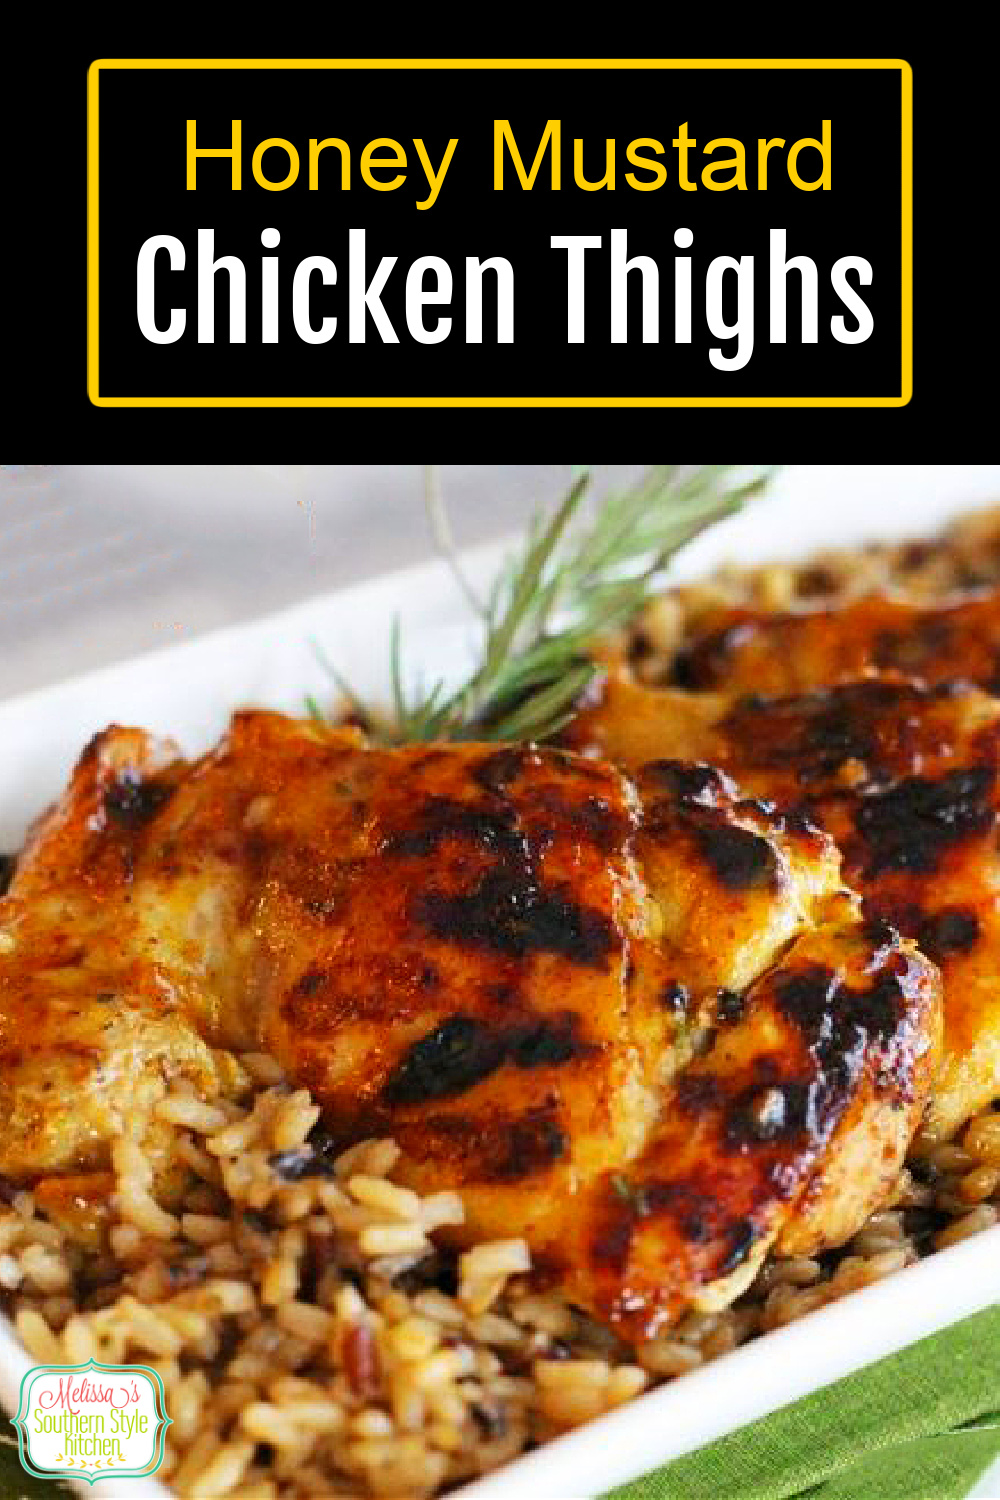 30 minute entrees like these Honey Mustard Glazed Chicken Thighs make a delicious weekday meal #honeymustardchicken #chickenthighs #chickenrecipes #chickenthighsrecipe #grilledchicken #easychickenthighs